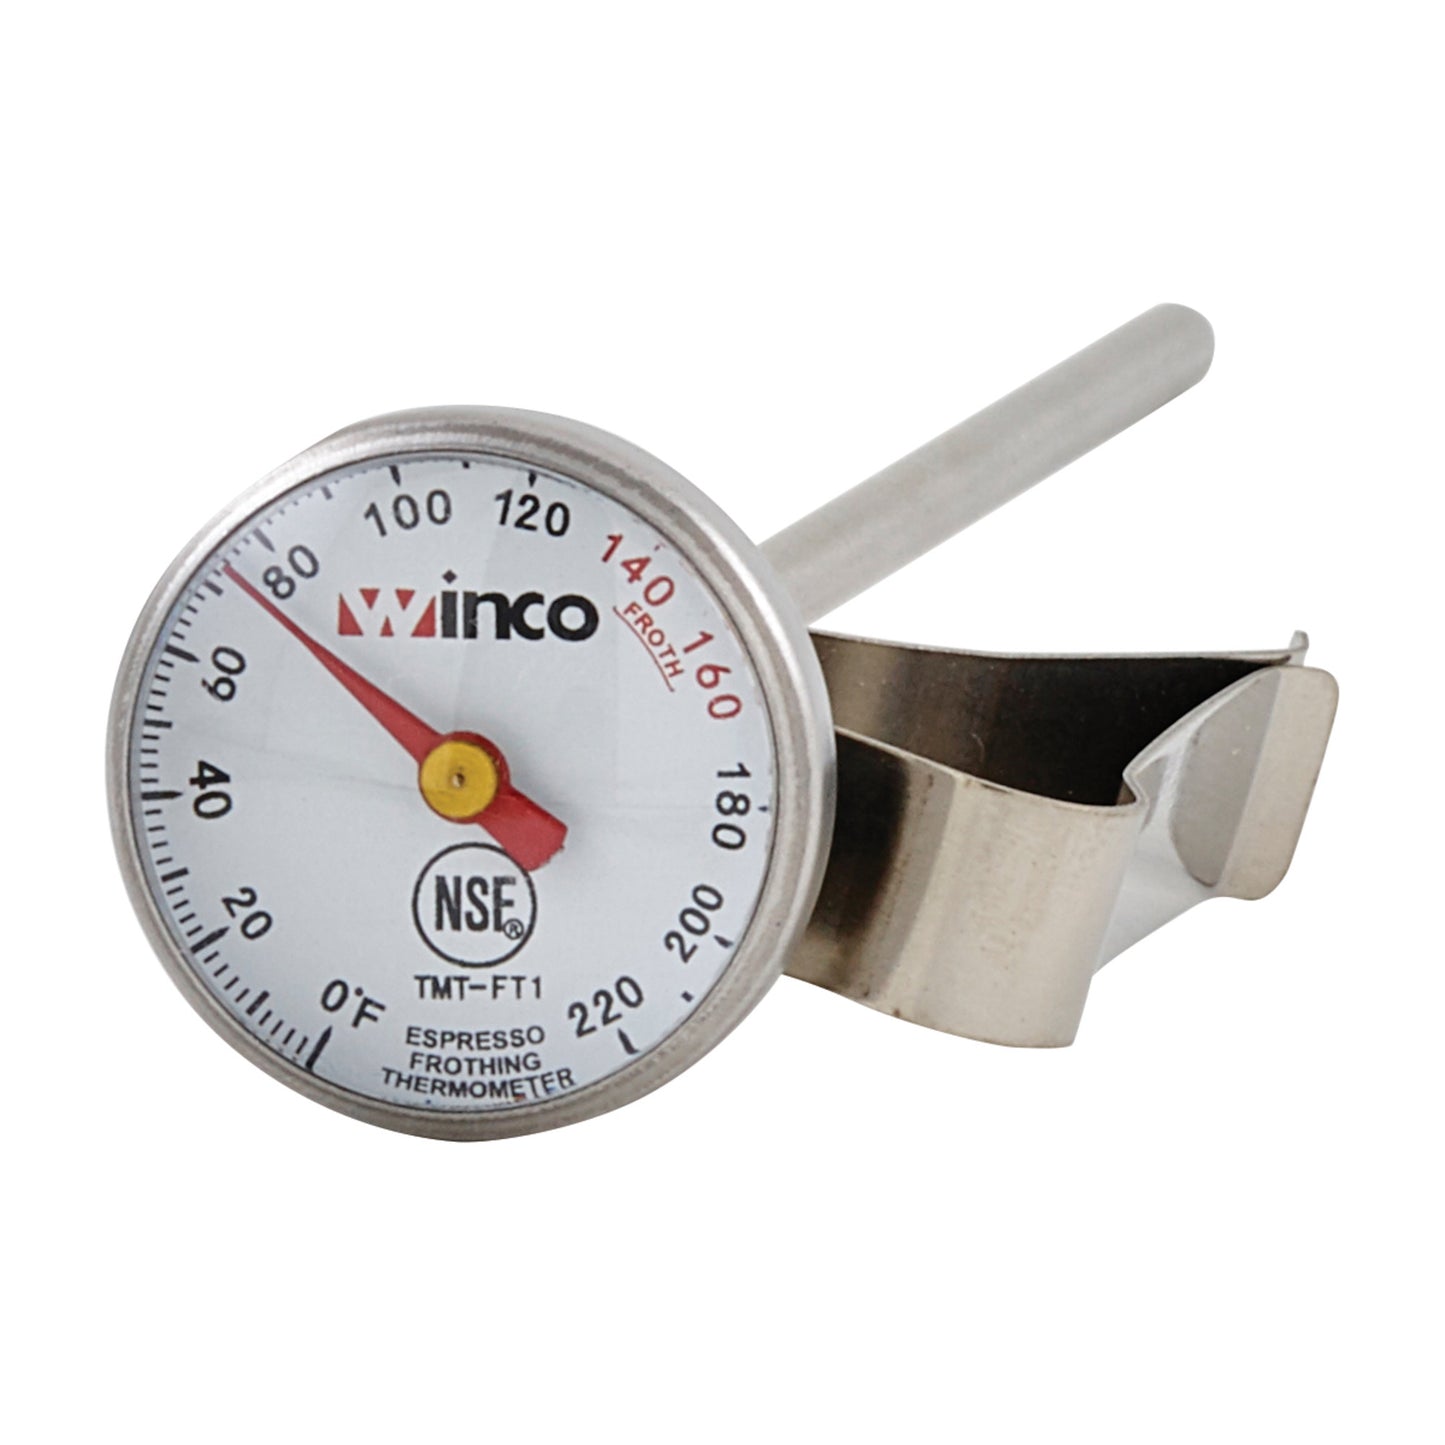 TMT-FT1 - Frothing Thermometer, 1" Dial, 5" Probe